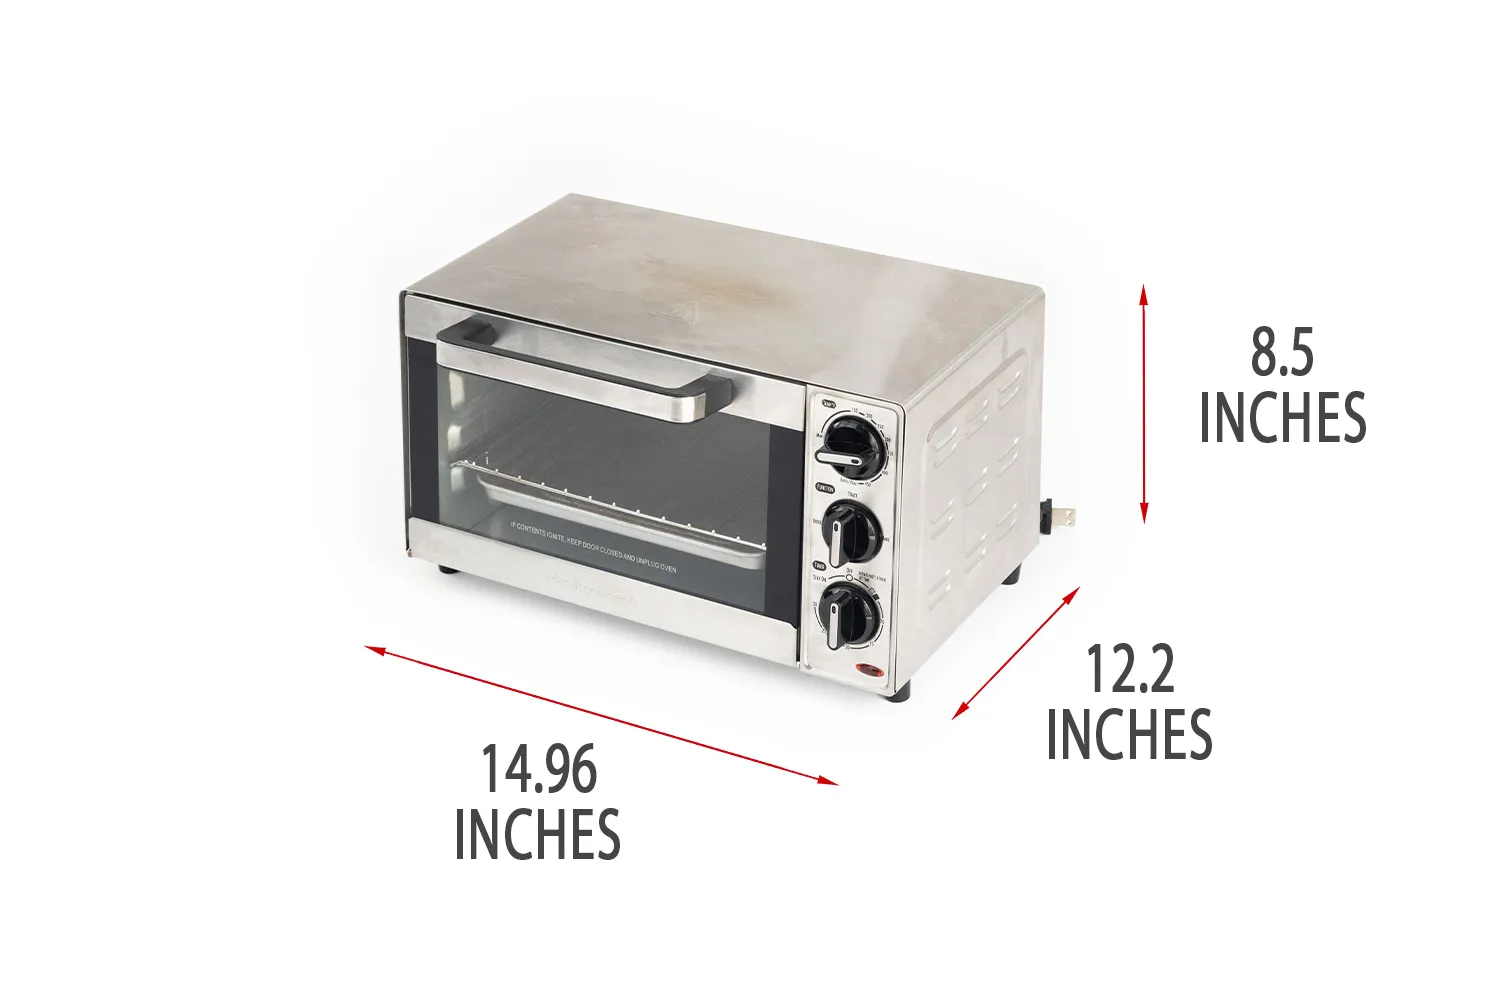 https://cdn.healthykitchen101.com/reviews/images/toaster-ovens/clbuklab2002t9t88ccc05b7a.jpg